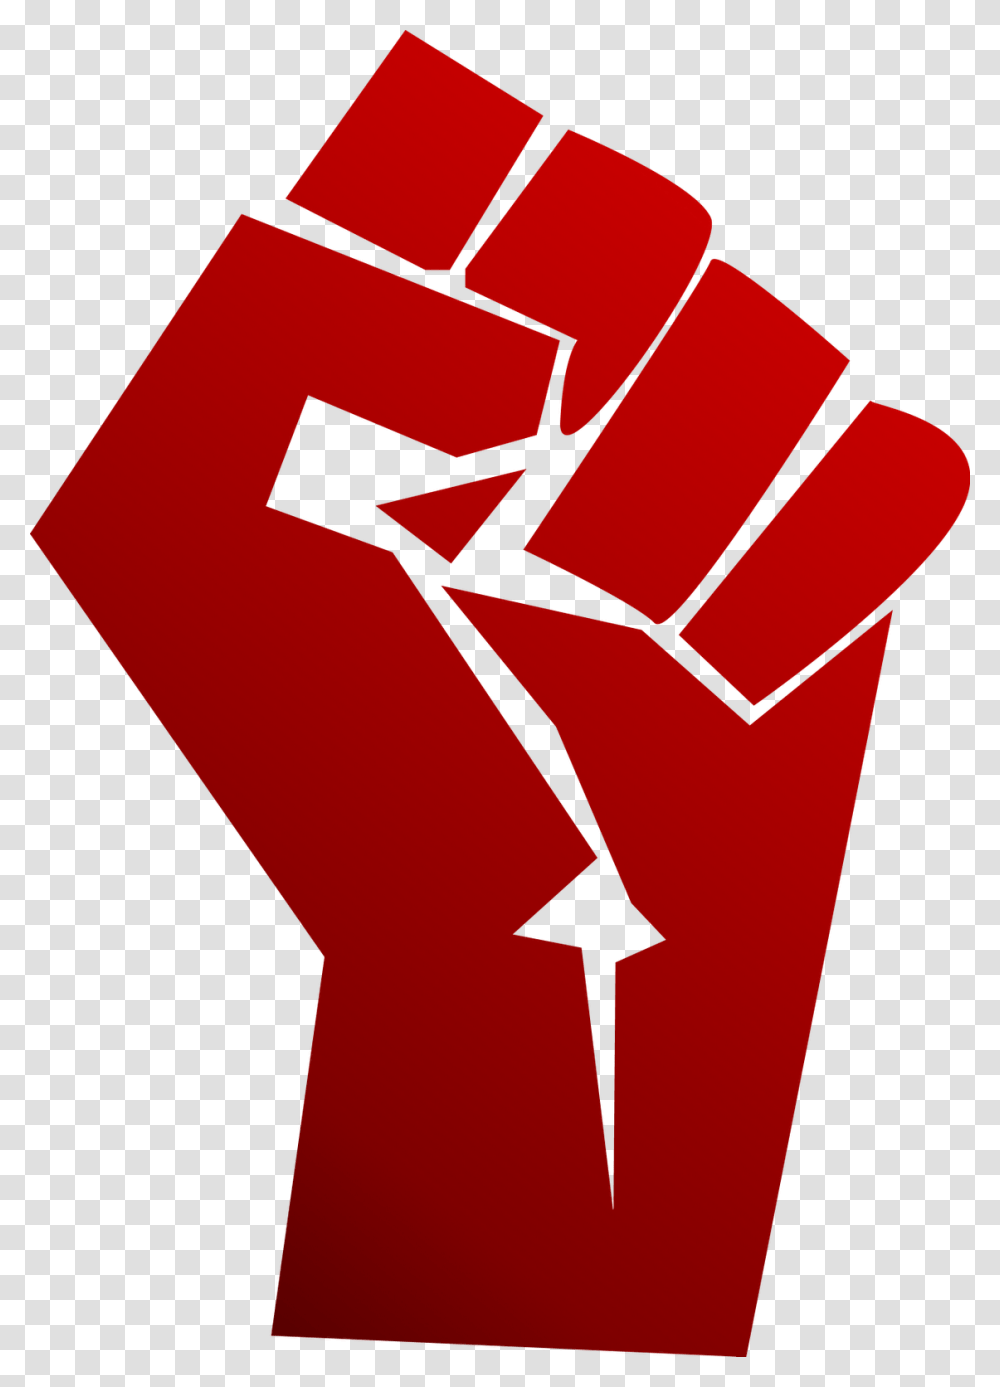 Background Fist Background Power Fist, Hand, Recycling Symbol Transparent Png